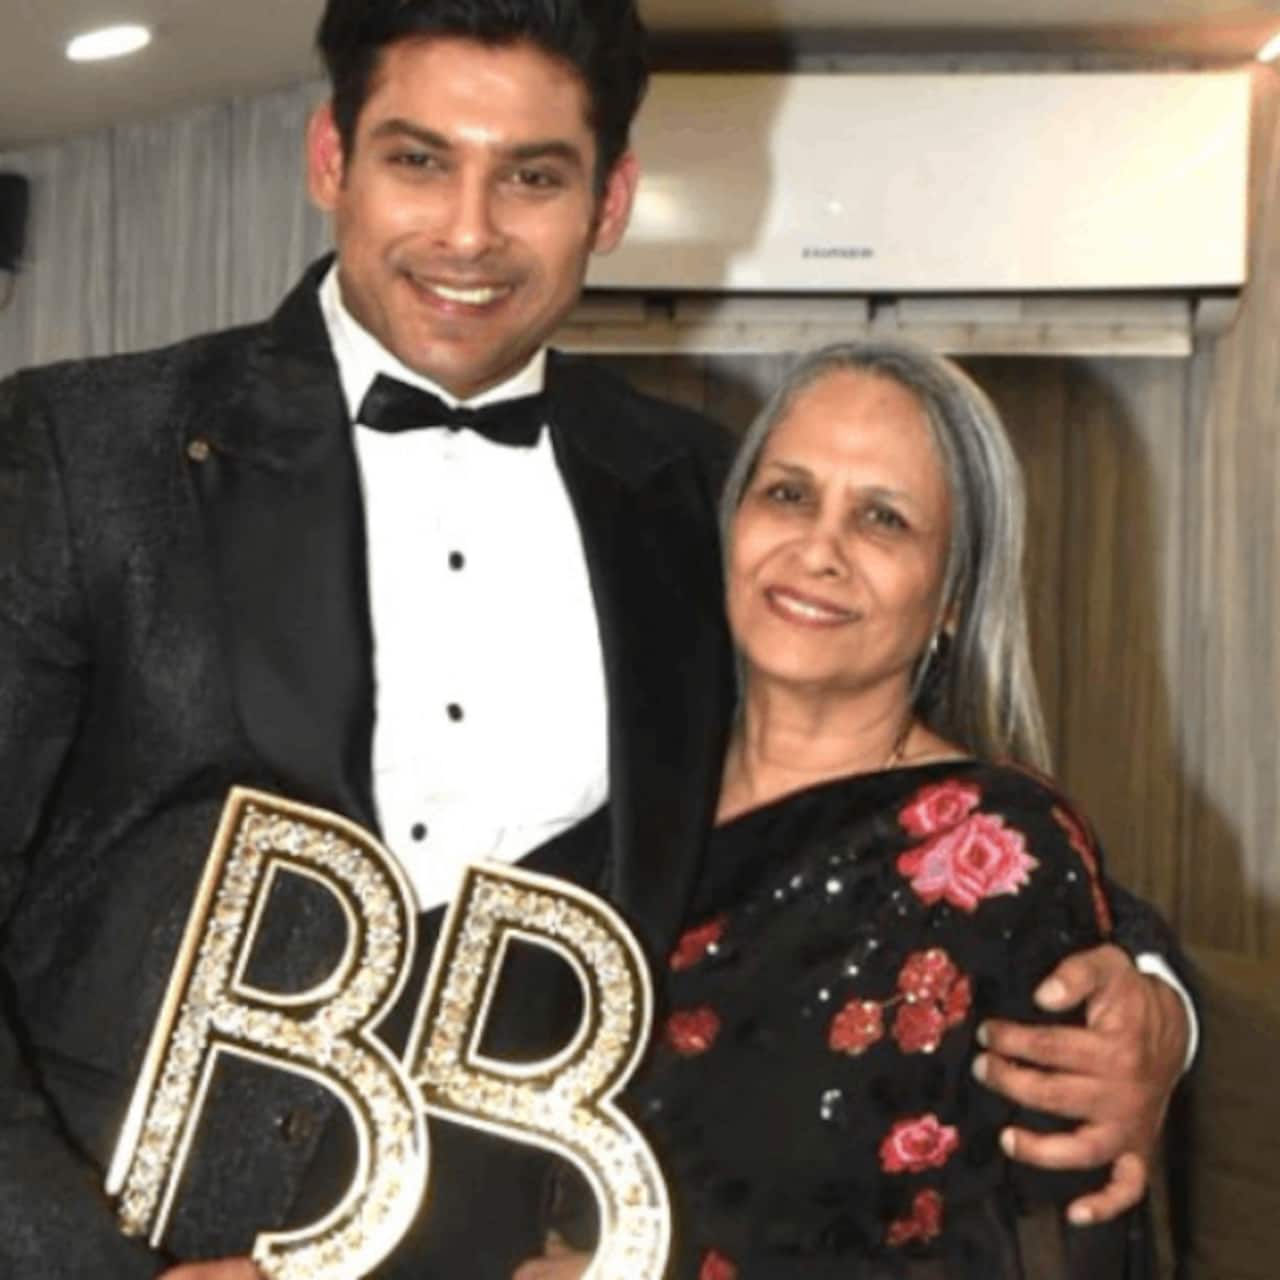 Bigg Boss 13 star Sidharth Shukla's mom Rita Maa's new picture goes viral; emotional fans say, 'Aunty ke face me pehle wali smile...'